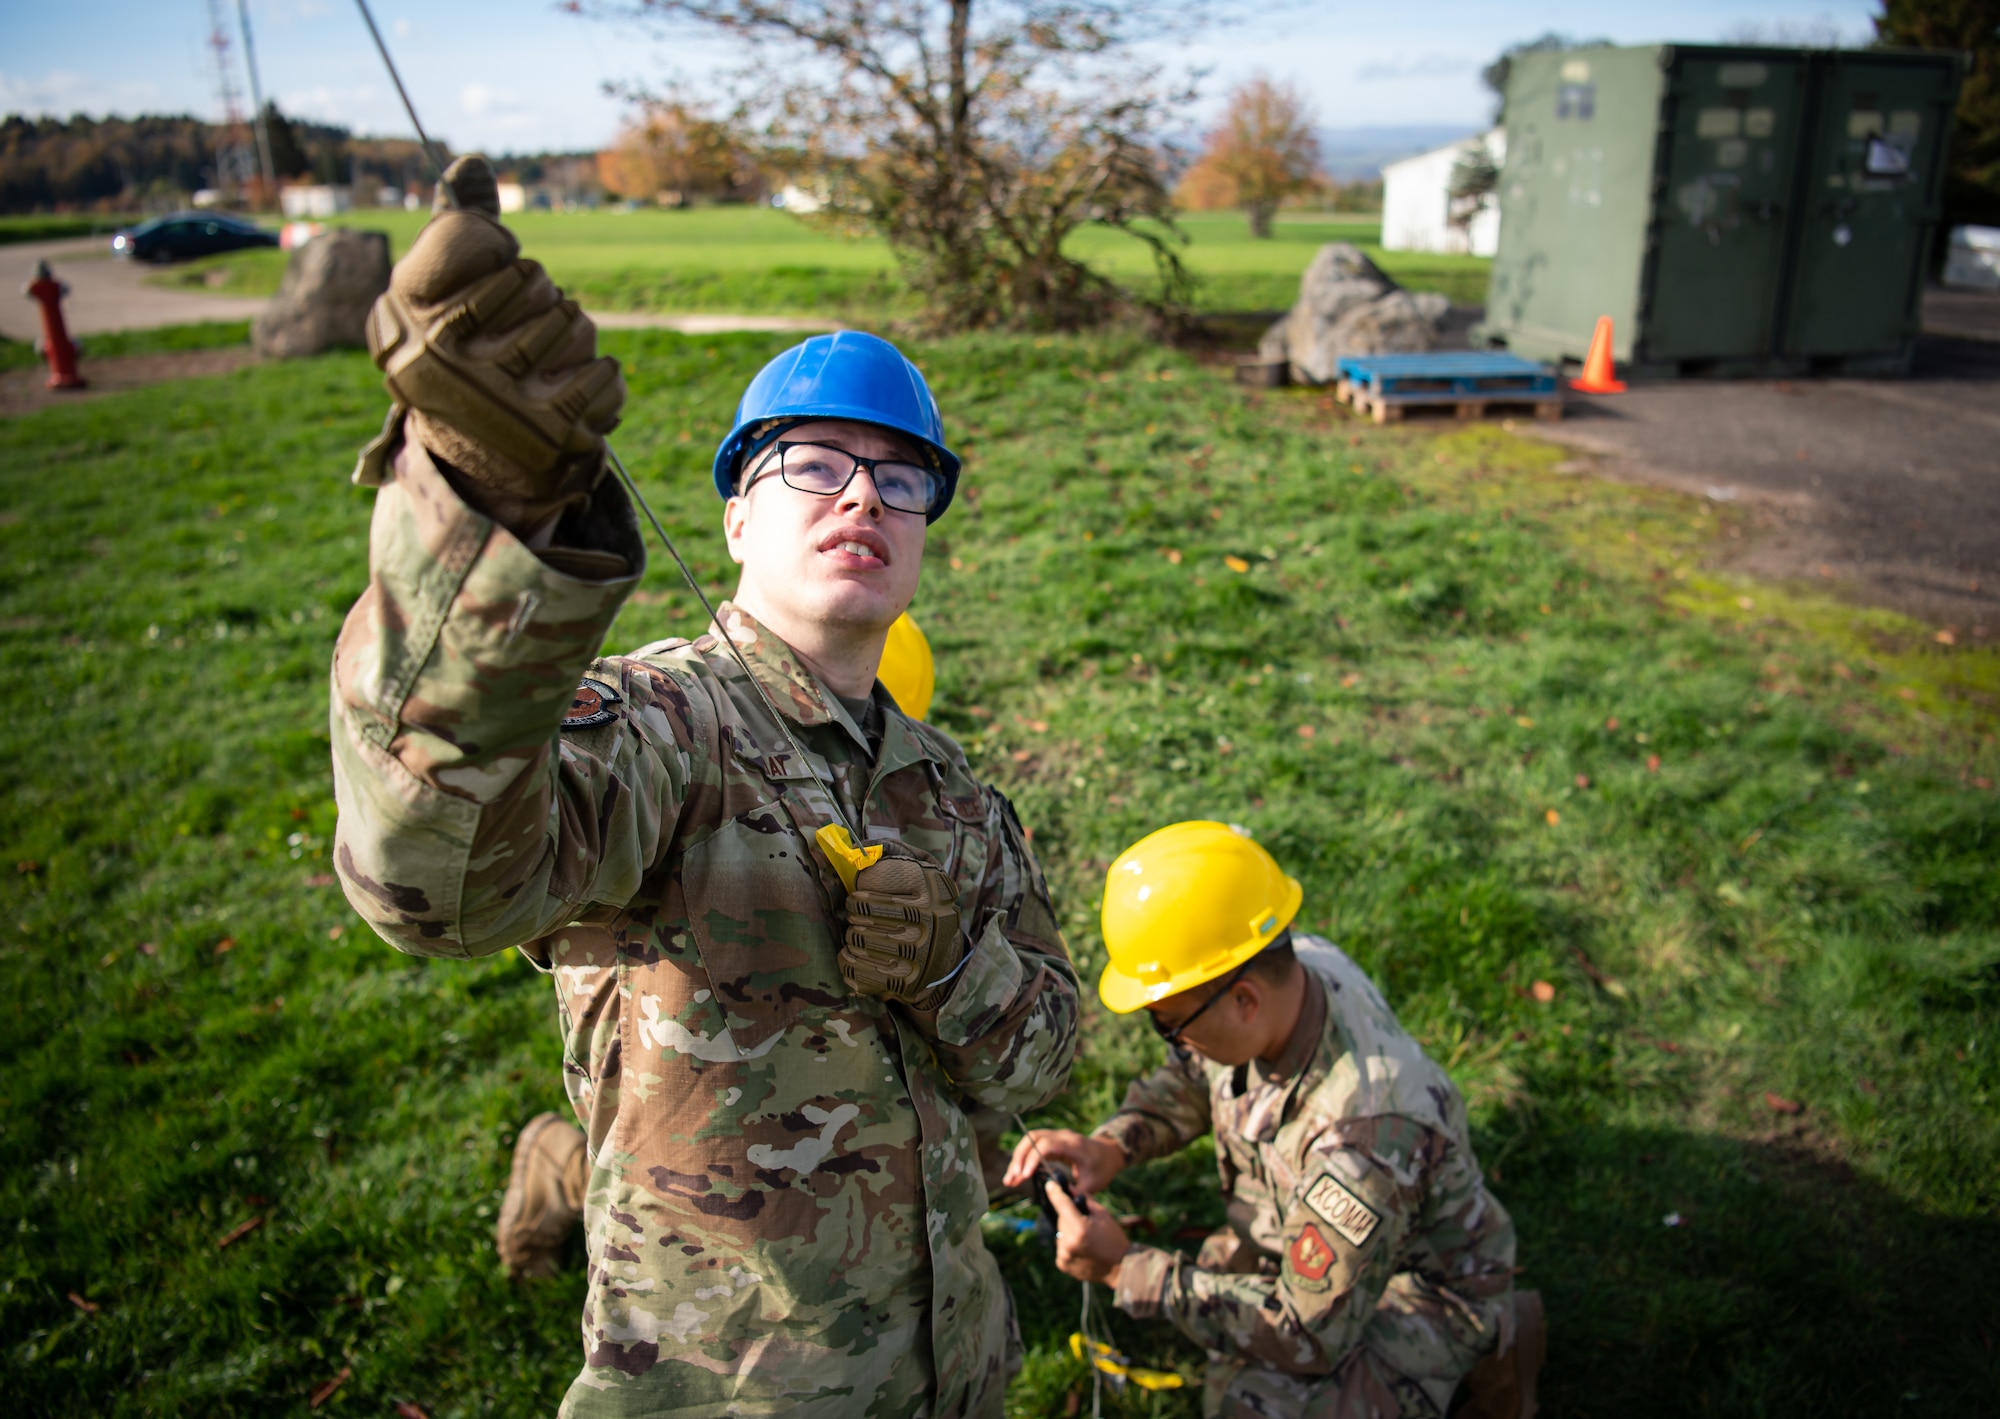 U.S. Air Force Airmen assigned to the 1st Combat Communications Squadron adjust antenna mast guy wires during Noble Skywave at U.S. Army Garrison Baumholder, Germany, Germany, Oct. 26, 2022. Military units from every corner of the globe participated in Noble Skywave, a contest to see which unit could operate a high frequency radio station the most effectively. (U.S. Air Force photo by Airman 1st Class Jared Lovett)